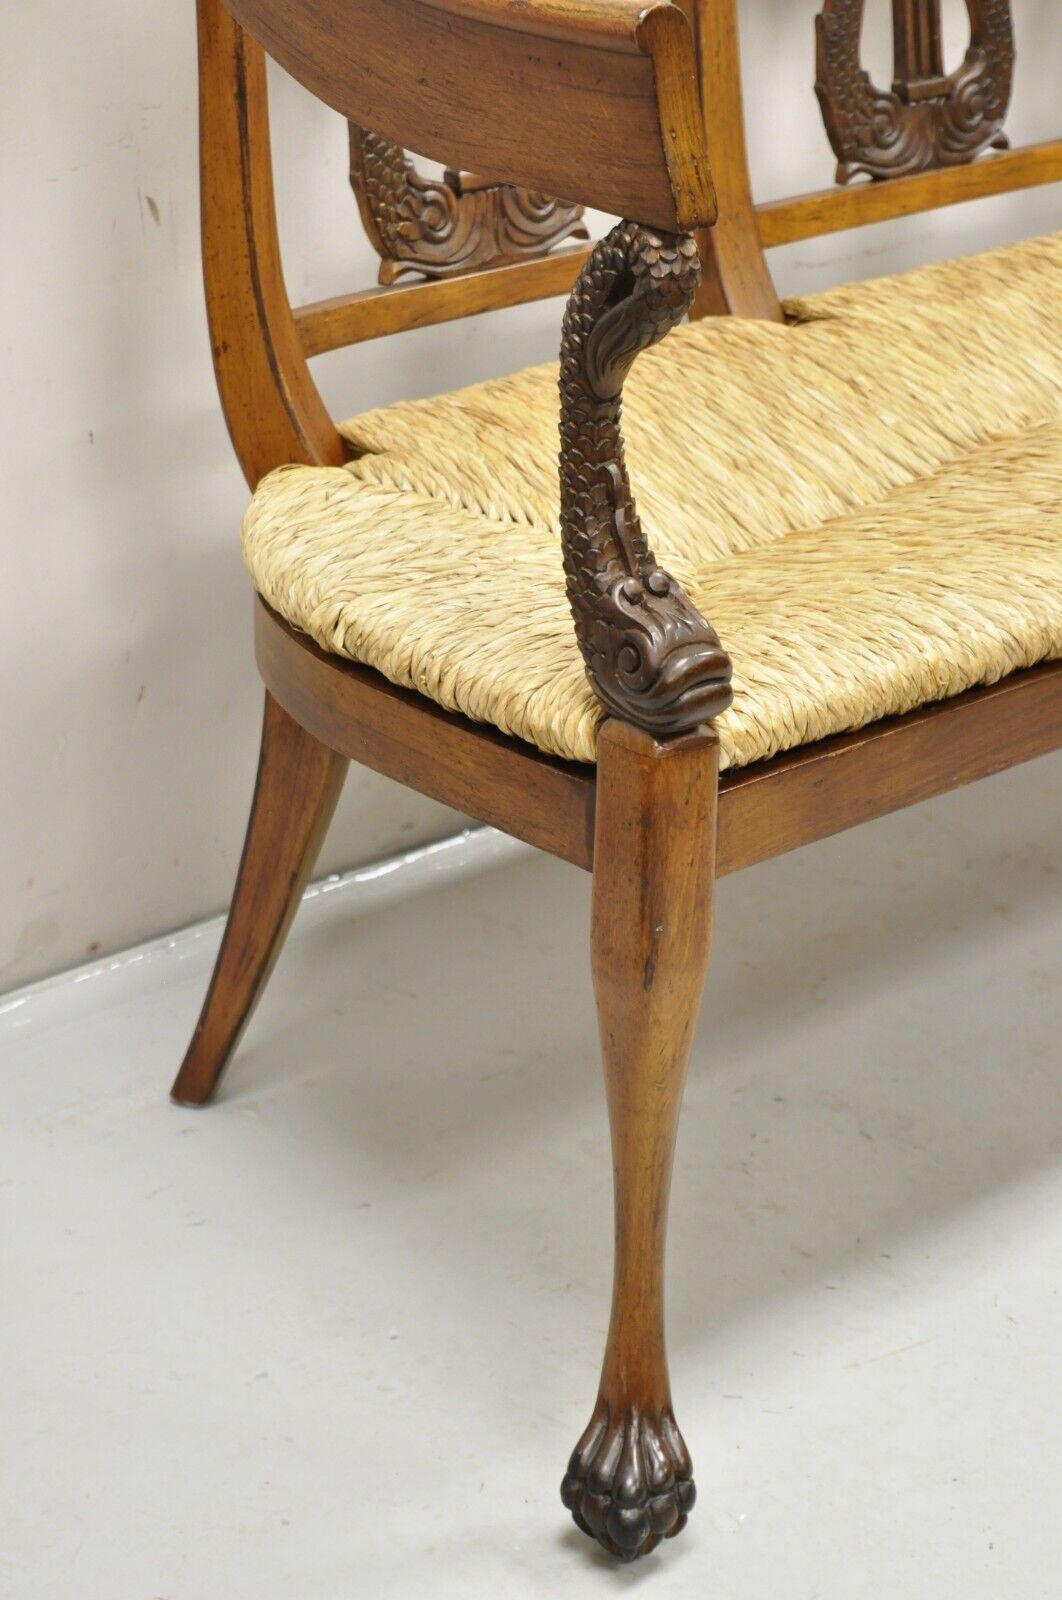 Vintage Italian Neoclassical Regency Style Serpent Lyre Carved Rush Seat Bench. Item featured has a solid carved wood frame, distressed finish, woven rope cord rush seat, serpent carved supports, carved paw feet, very nice item. Circa Late 20th